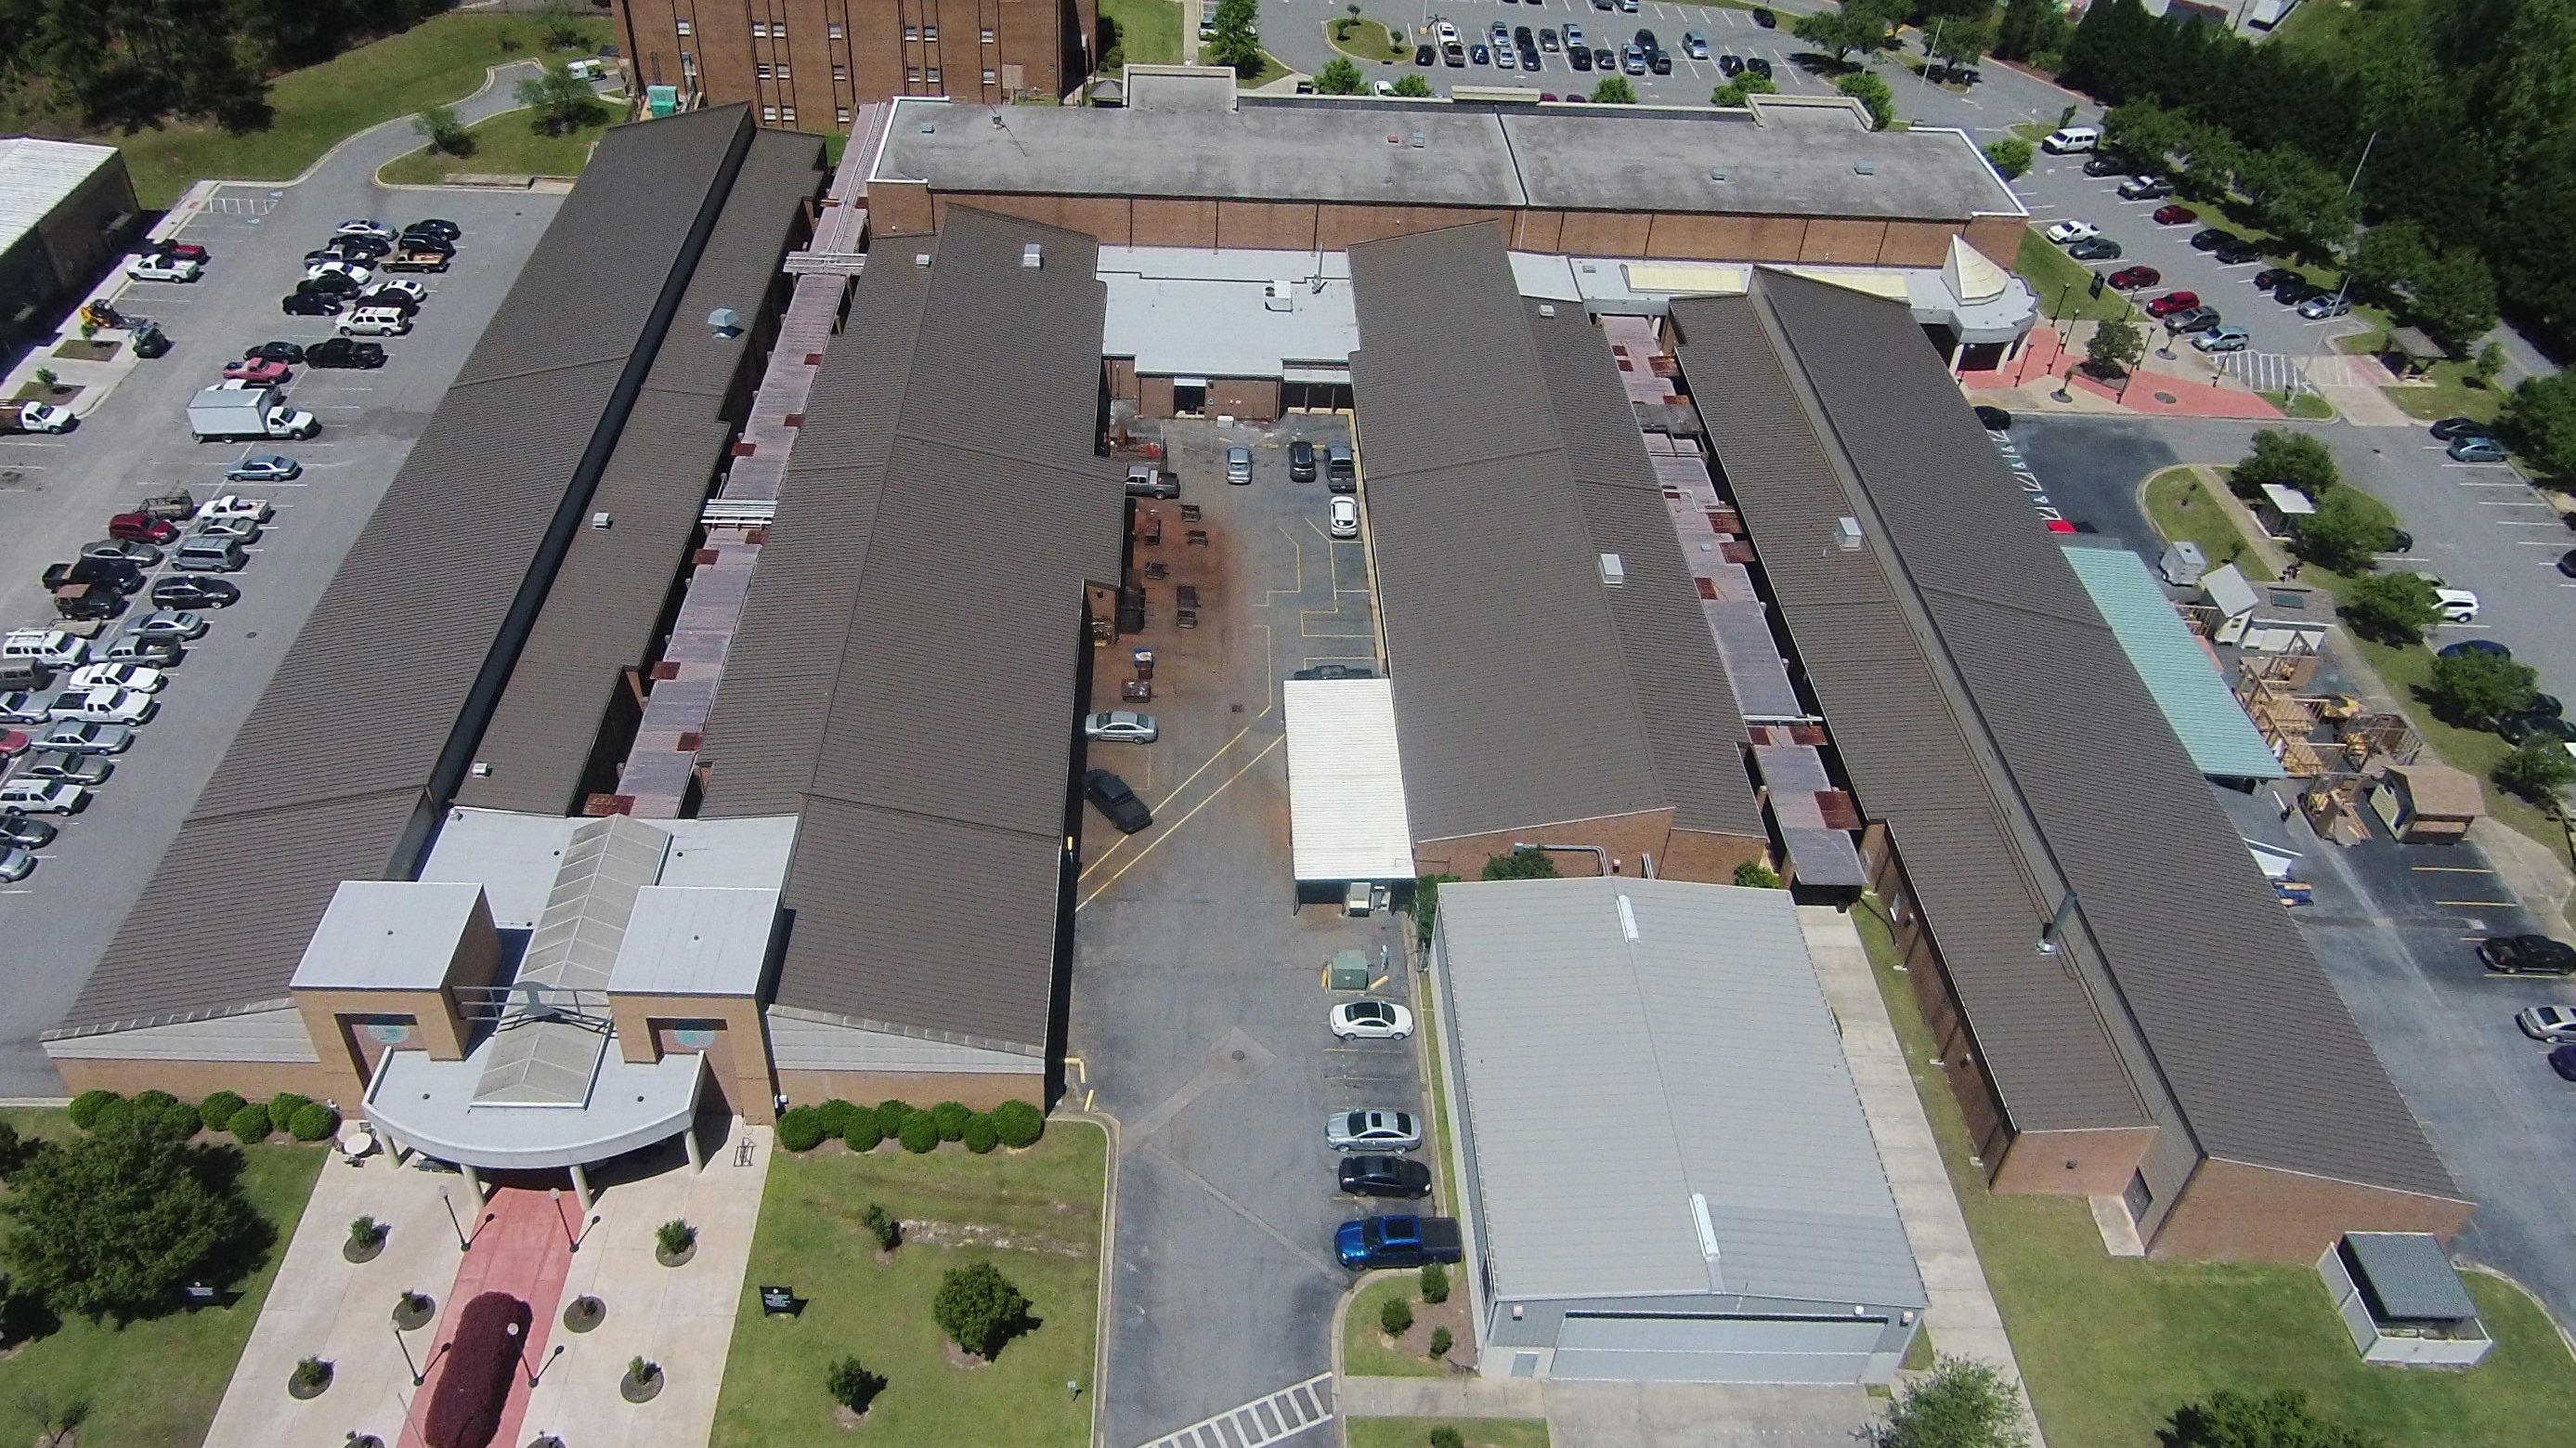 238T Symmetrical Standing Seam Panel Solves Problem for Georgia Technical College